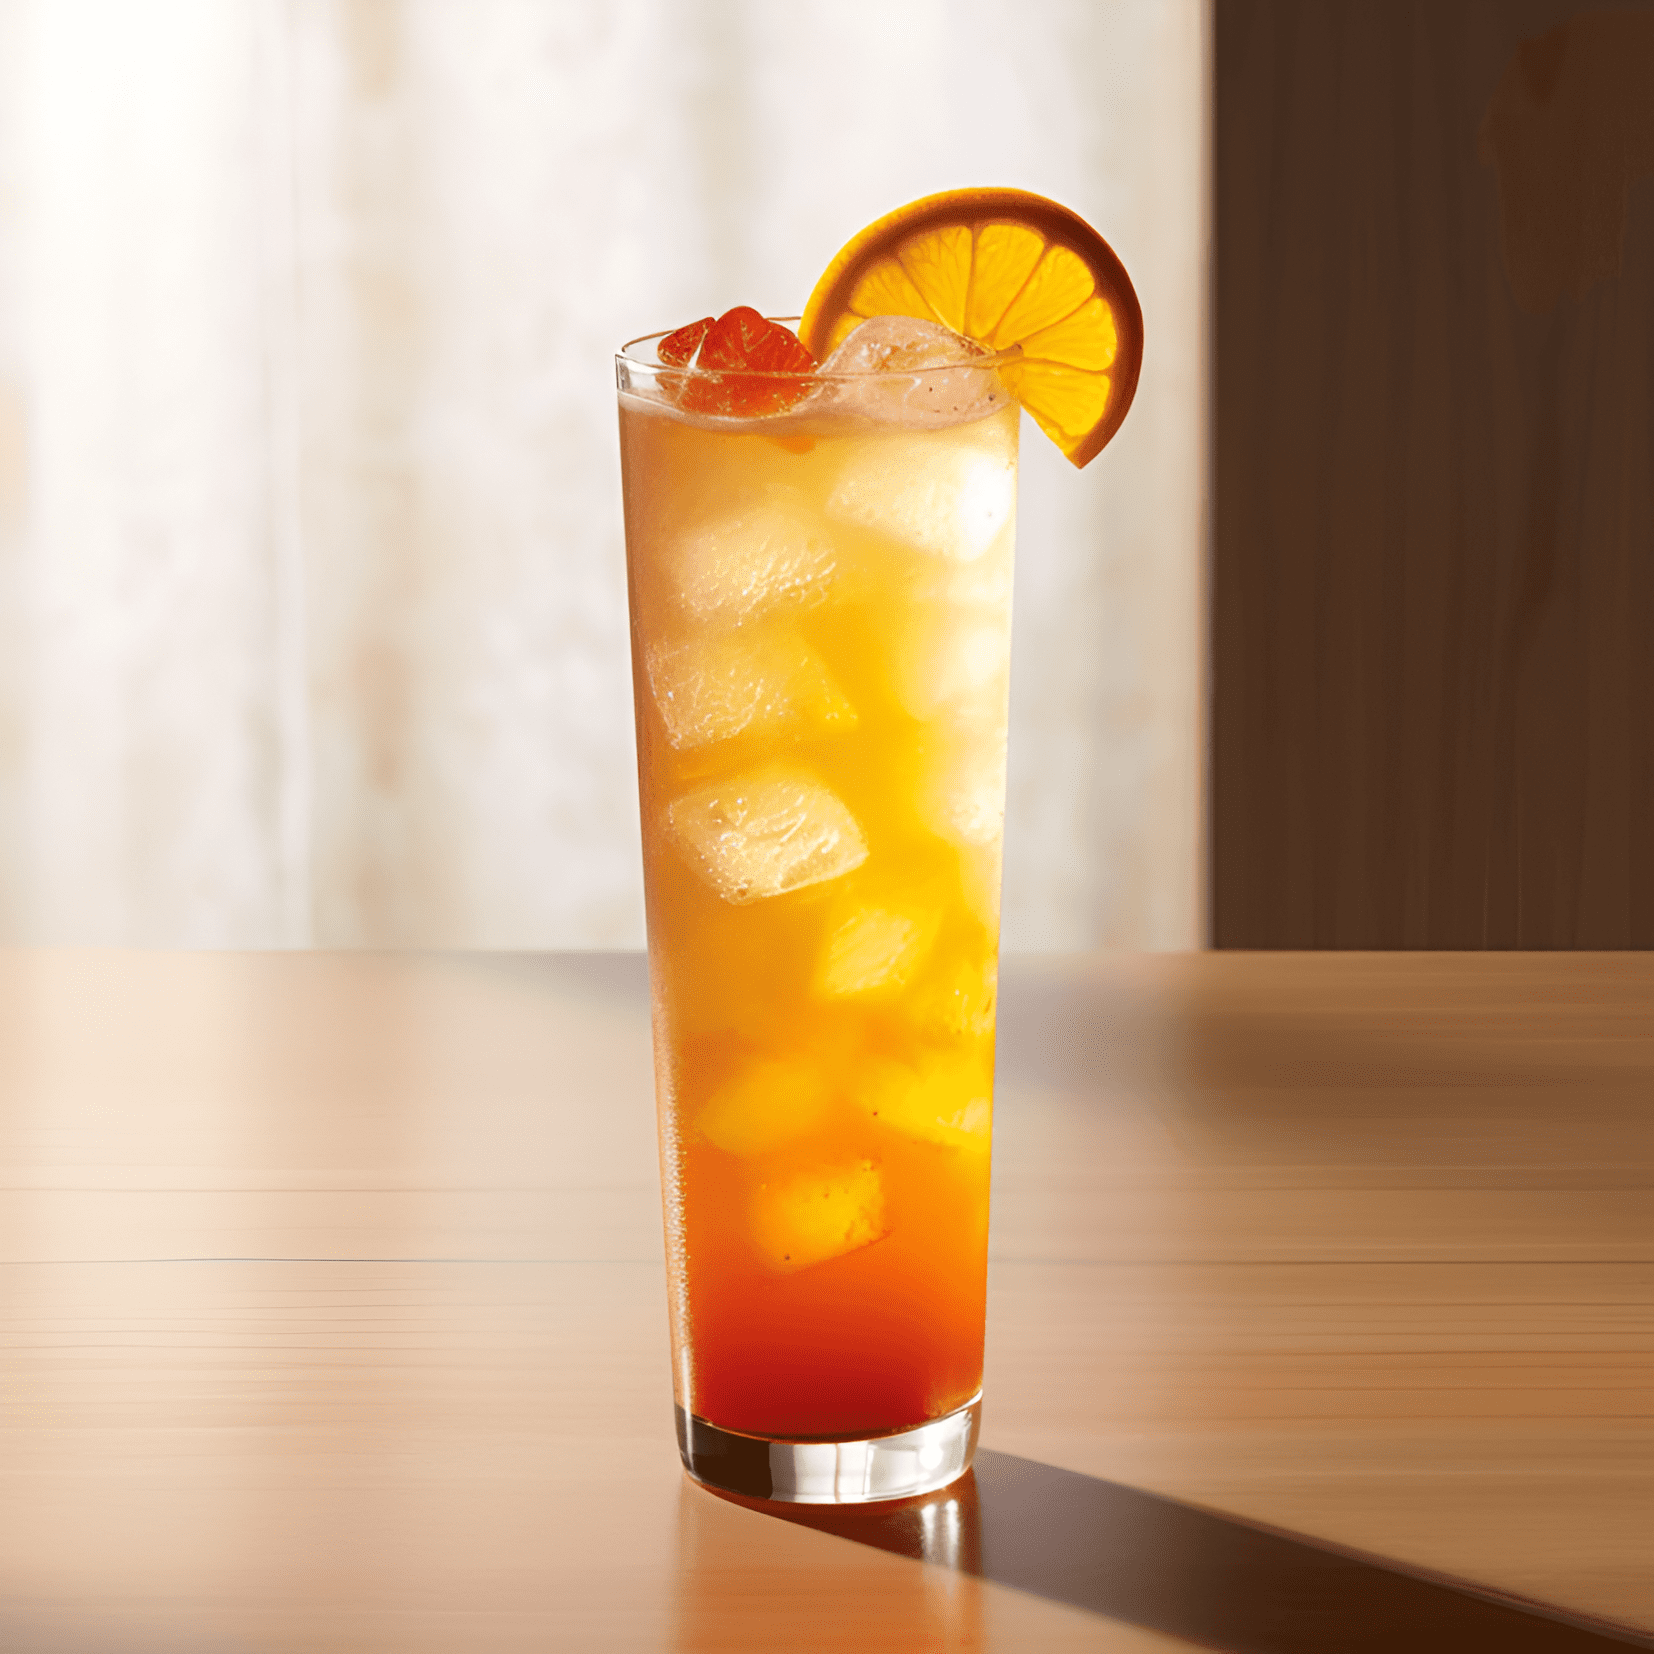 Orange Oasis Cocktail Recipe - The Orange Oasis cocktail is a delightful blend of sweet, tangy, and fruity flavors. The orange and pineapple juices provide a refreshing citrusy taste, while the coconut rum adds a hint of tropical sweetness. The grenadine gives the drink a touch of tartness, making it a well-balanced and enjoyable cocktail.